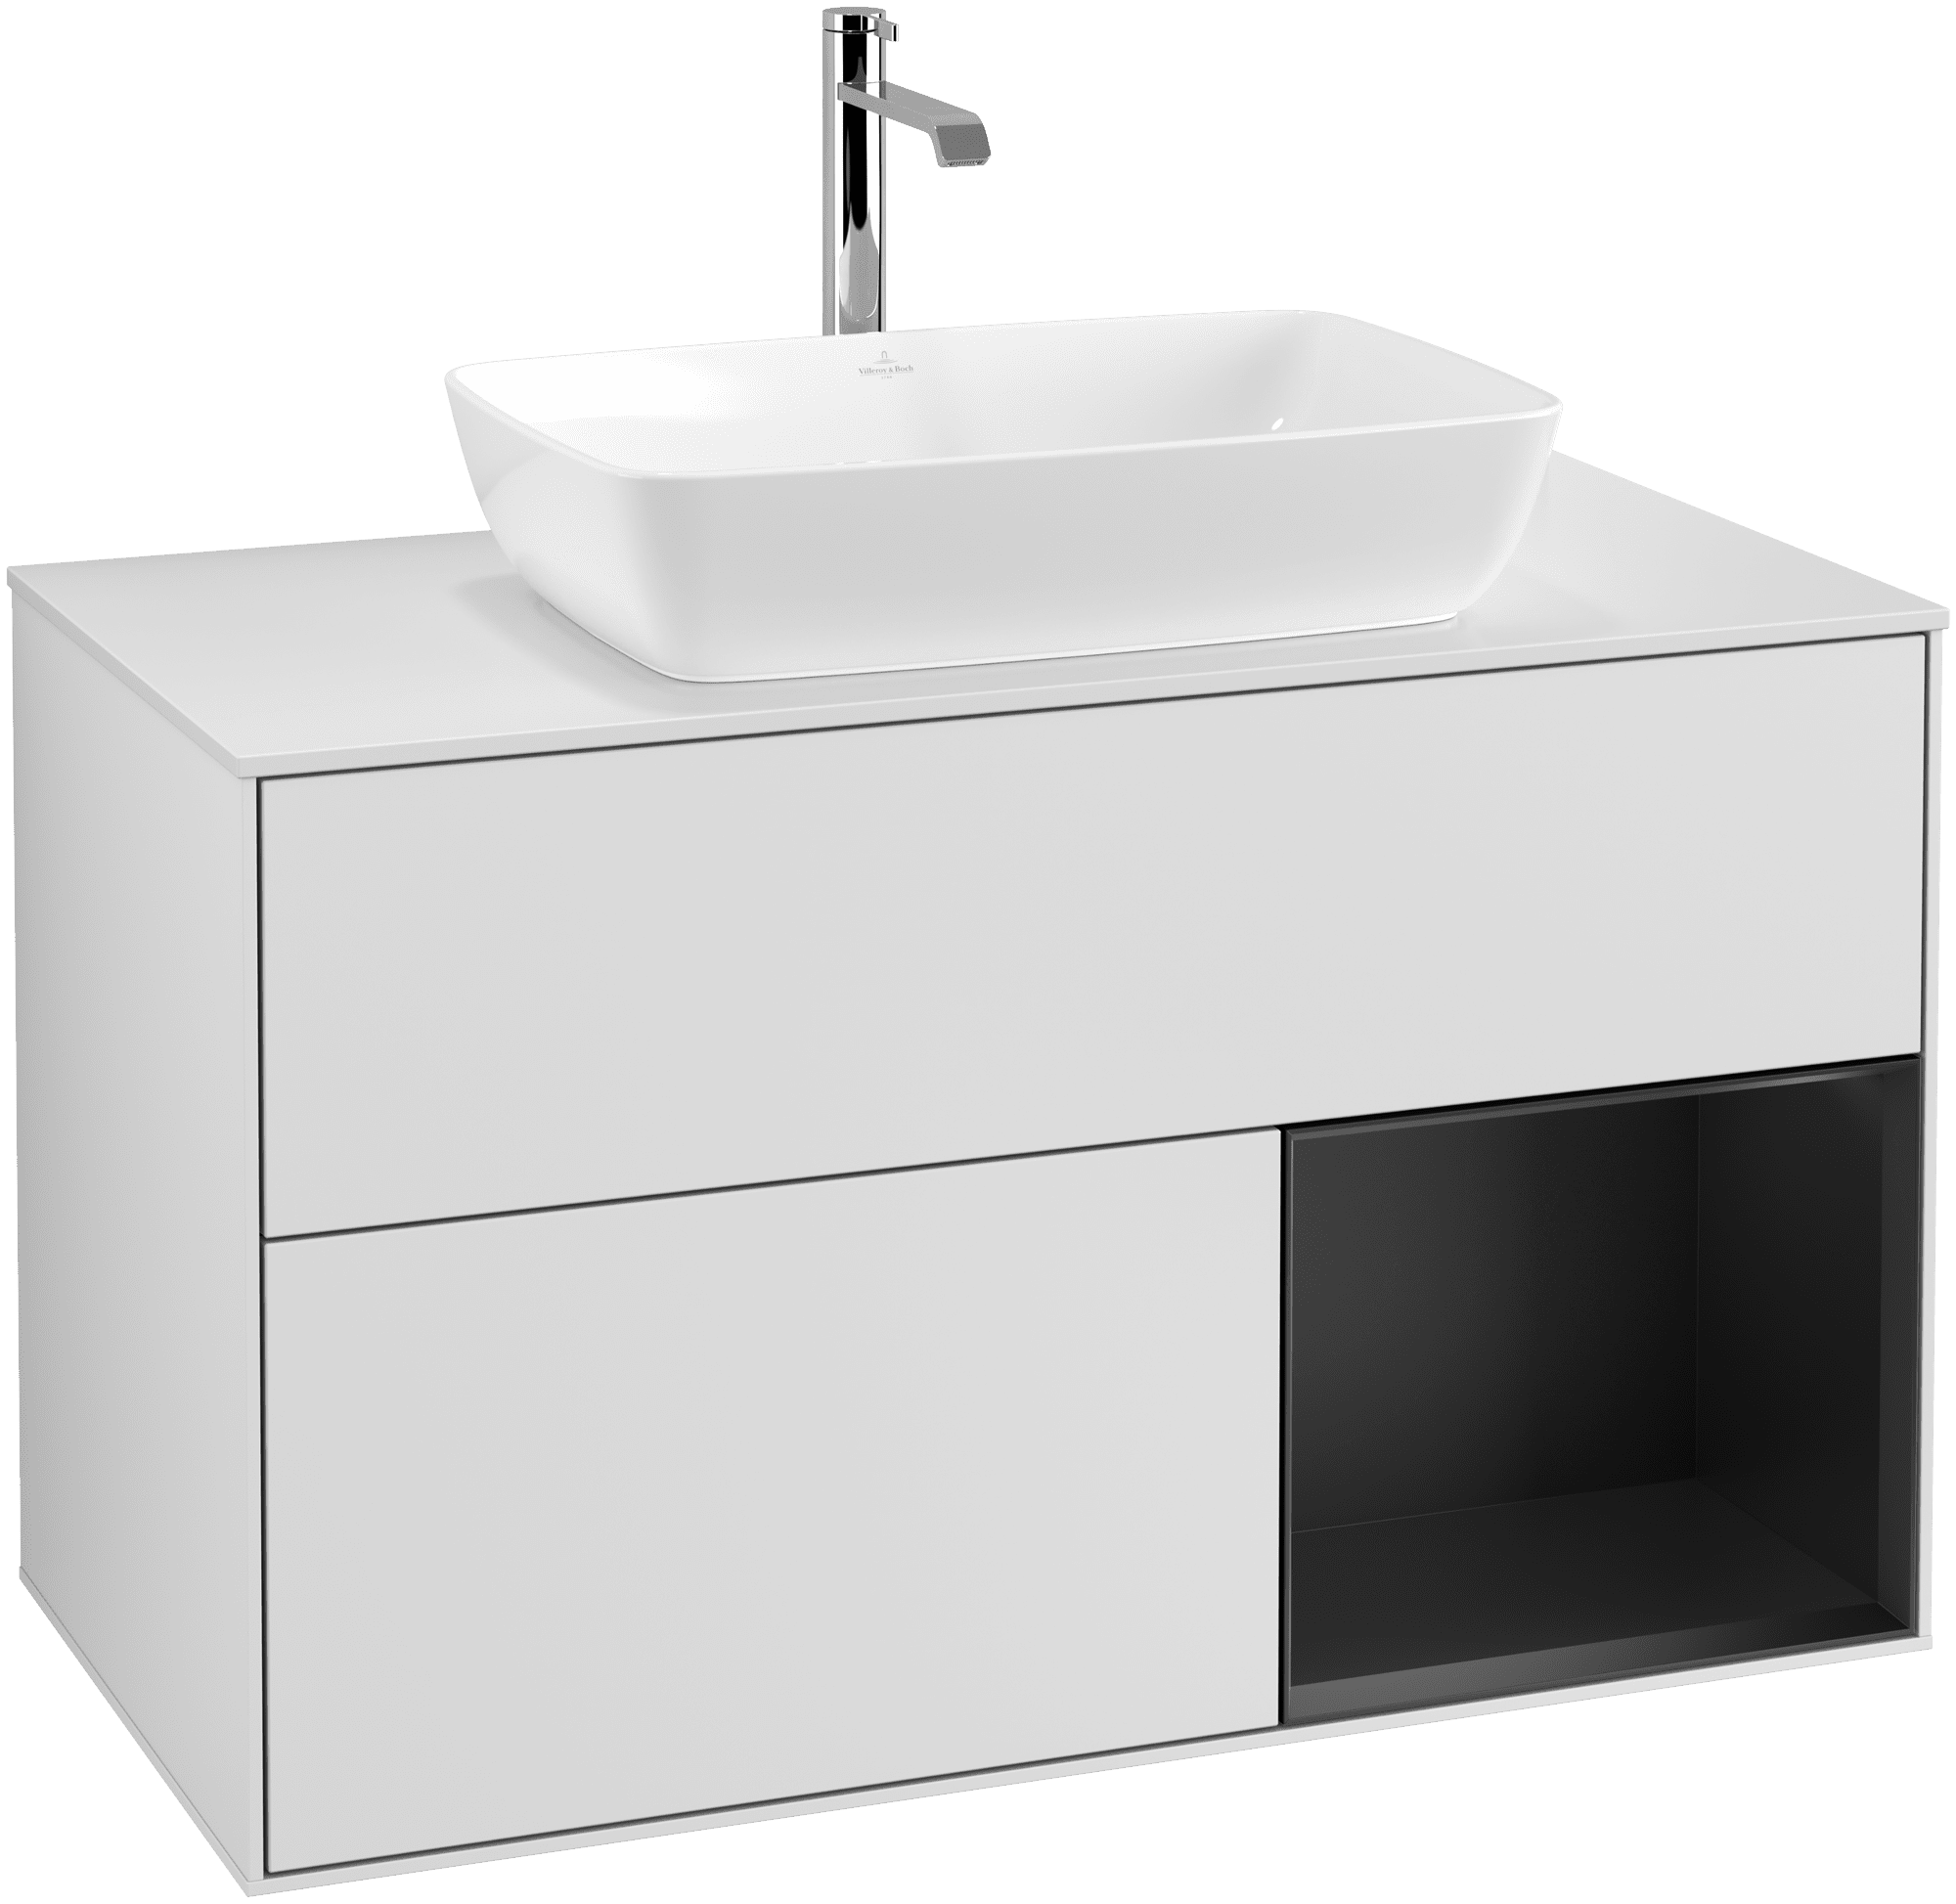 Obrázek VILLEROY BOCH Finion Vanity unit, with lighting, 2 pull-out compartments, 1000 x 603 x 501 mm, White Matt Lacquer / Black Matt Lacquer / Glass White Matt #G781PDMT